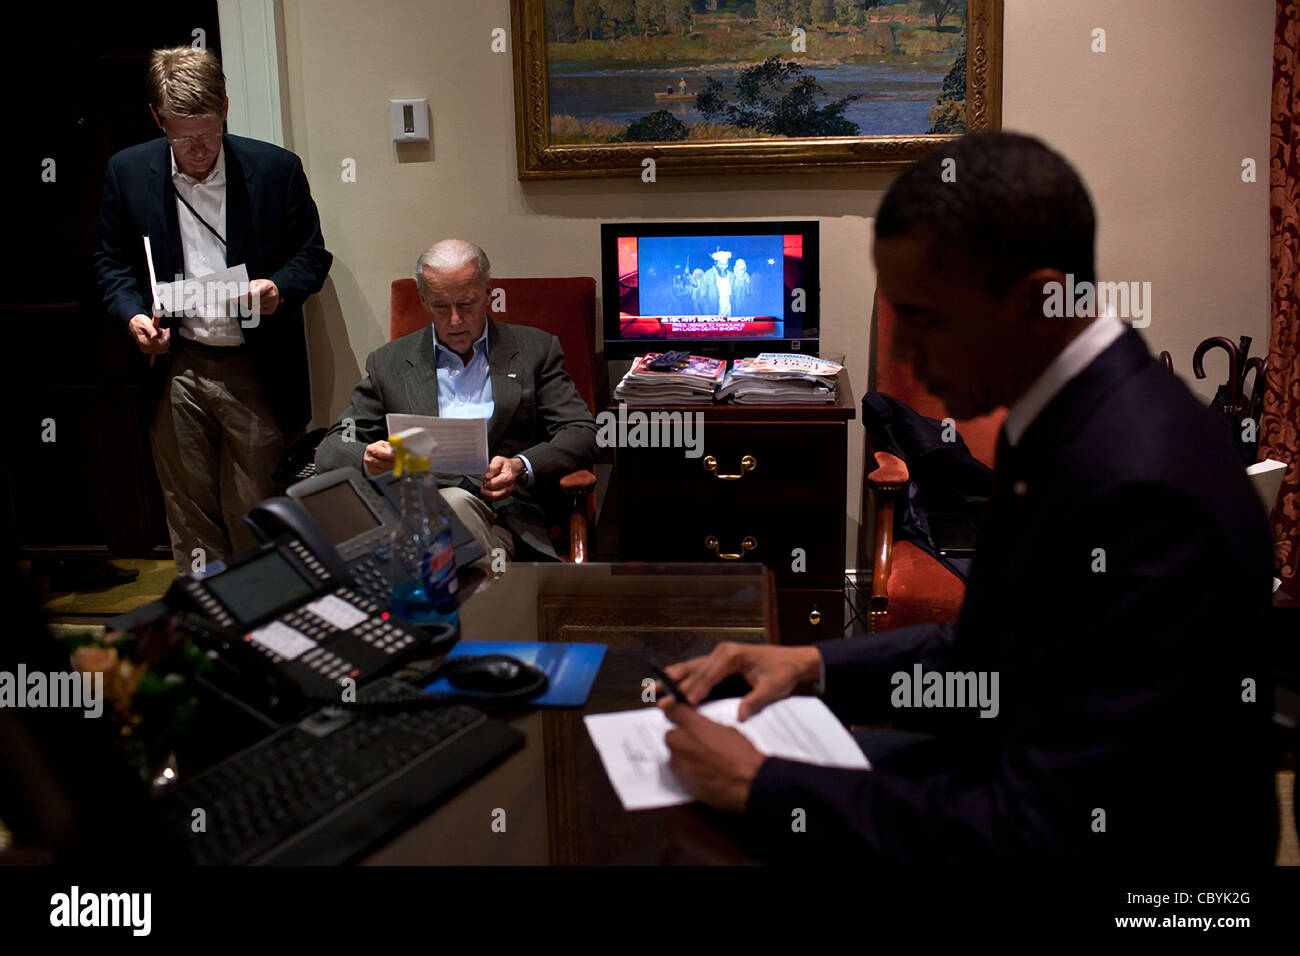 President Barack Obama edits his statement before officially announcing that a US special forces team killed terrorist Osama bin Laden May 1, 2011 at the White House in Washington, DC. A television news report announces that bid Laden had been killed and a photograph of him appeared on the televisio Stock Photo